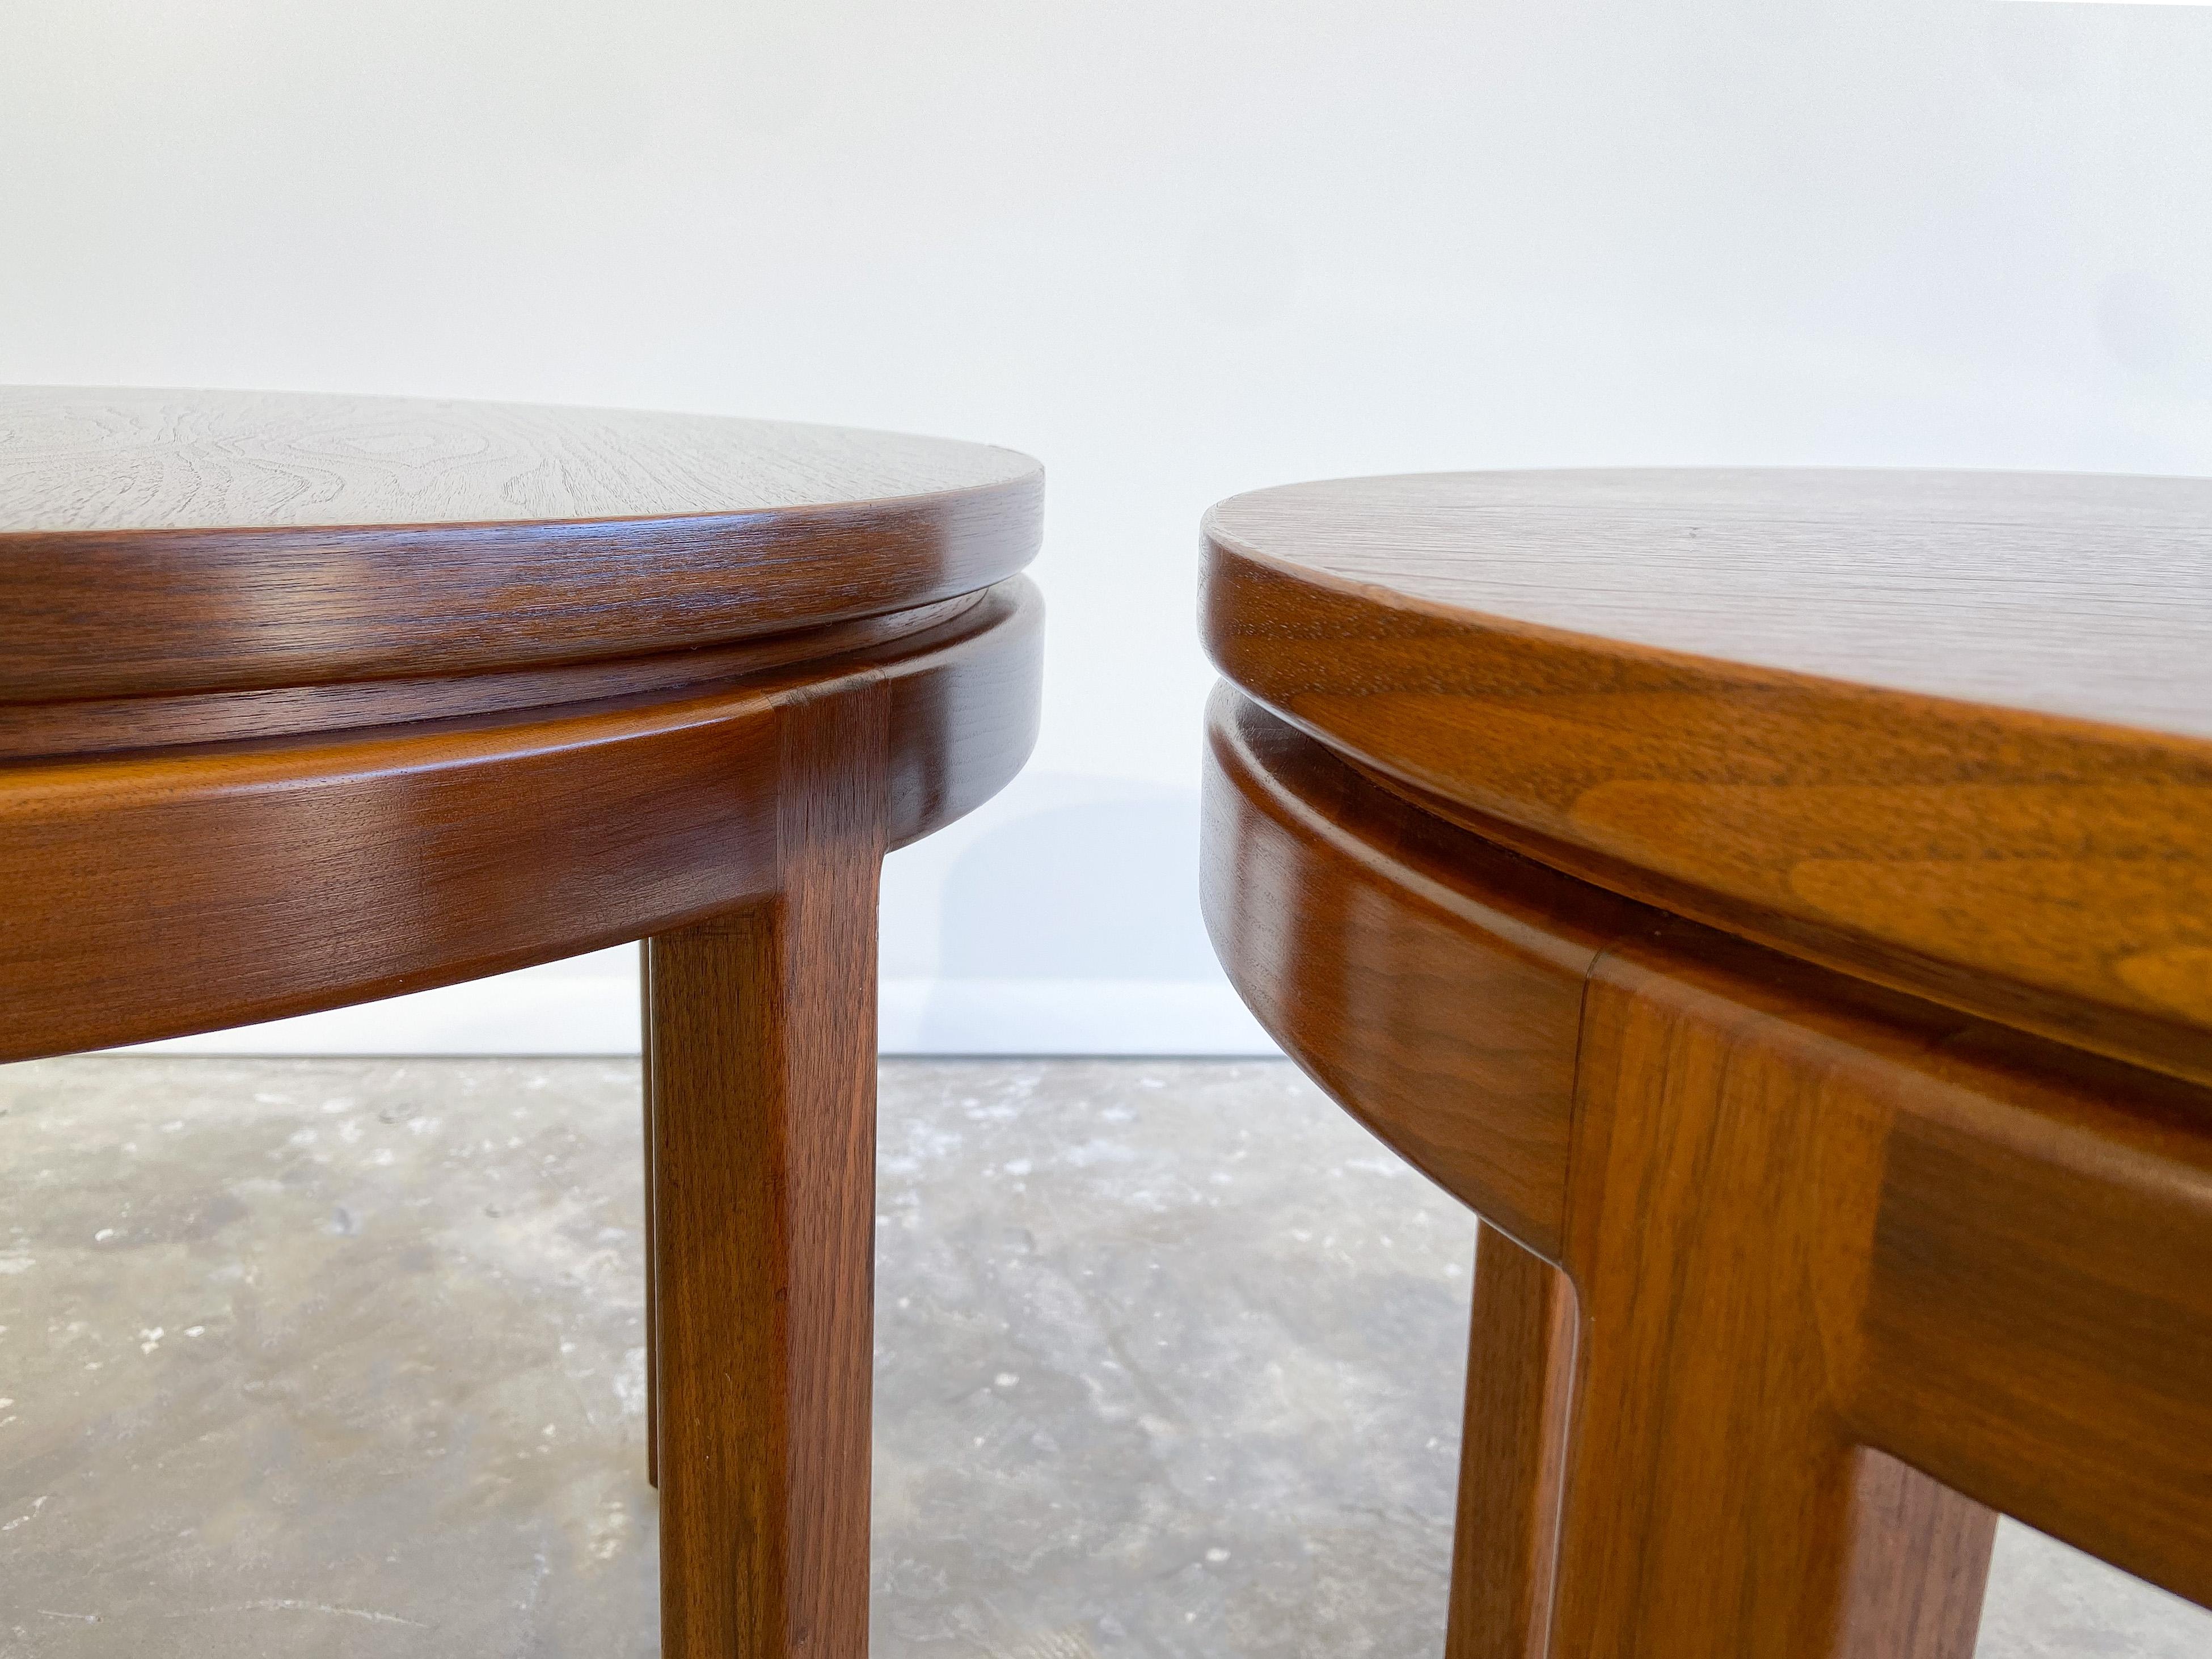 20th Century Walnut Side or End Tables in the manner of Edward Wormley for Dunbar, 1960's For Sale